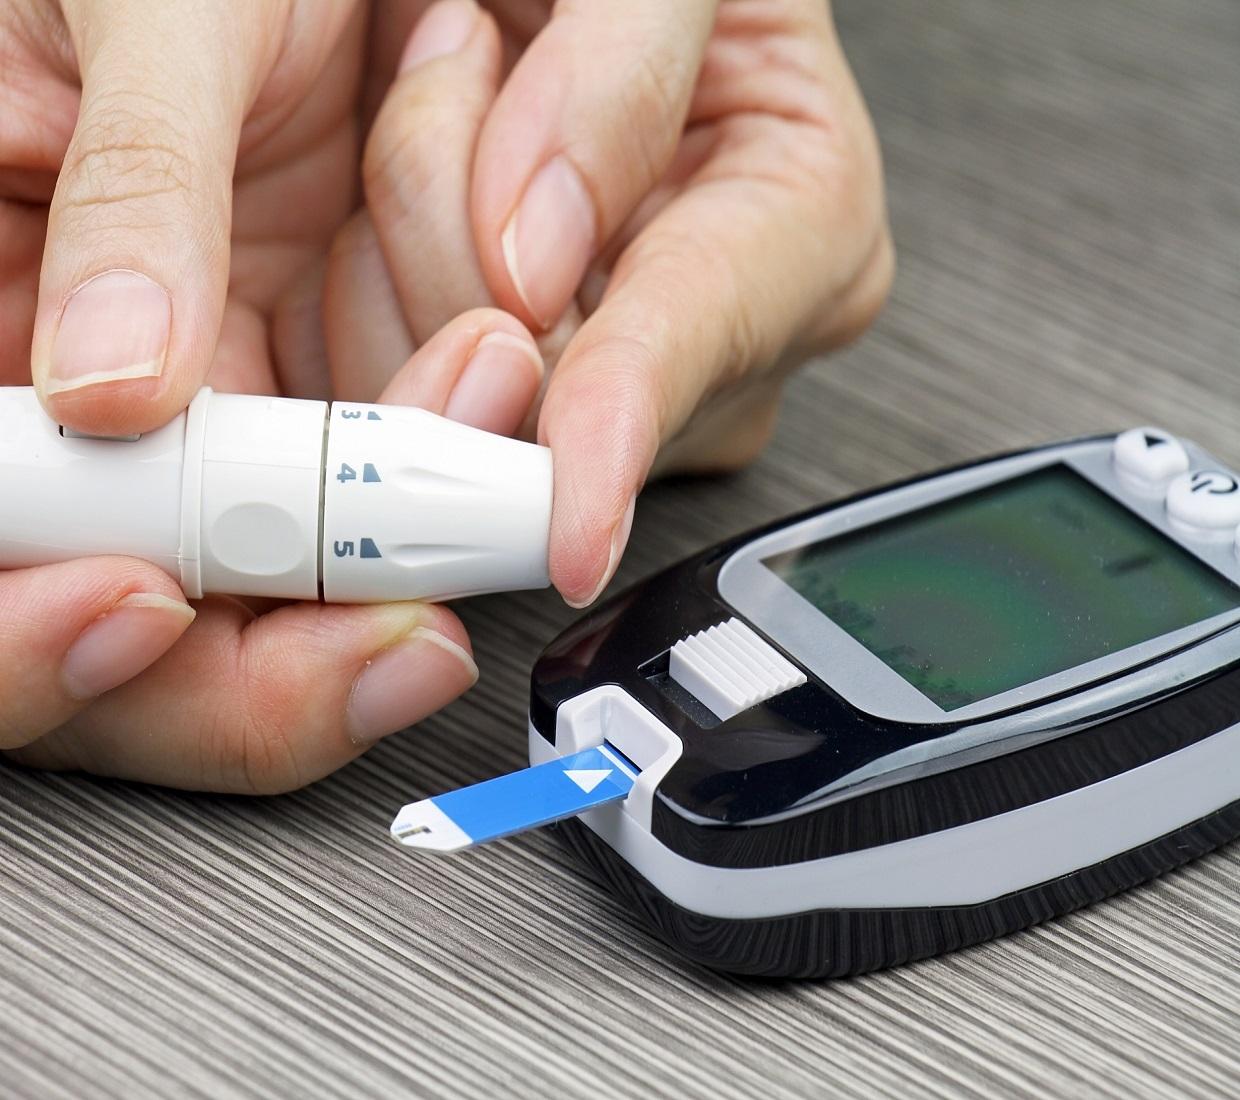 How often should my blood sugar be measured?